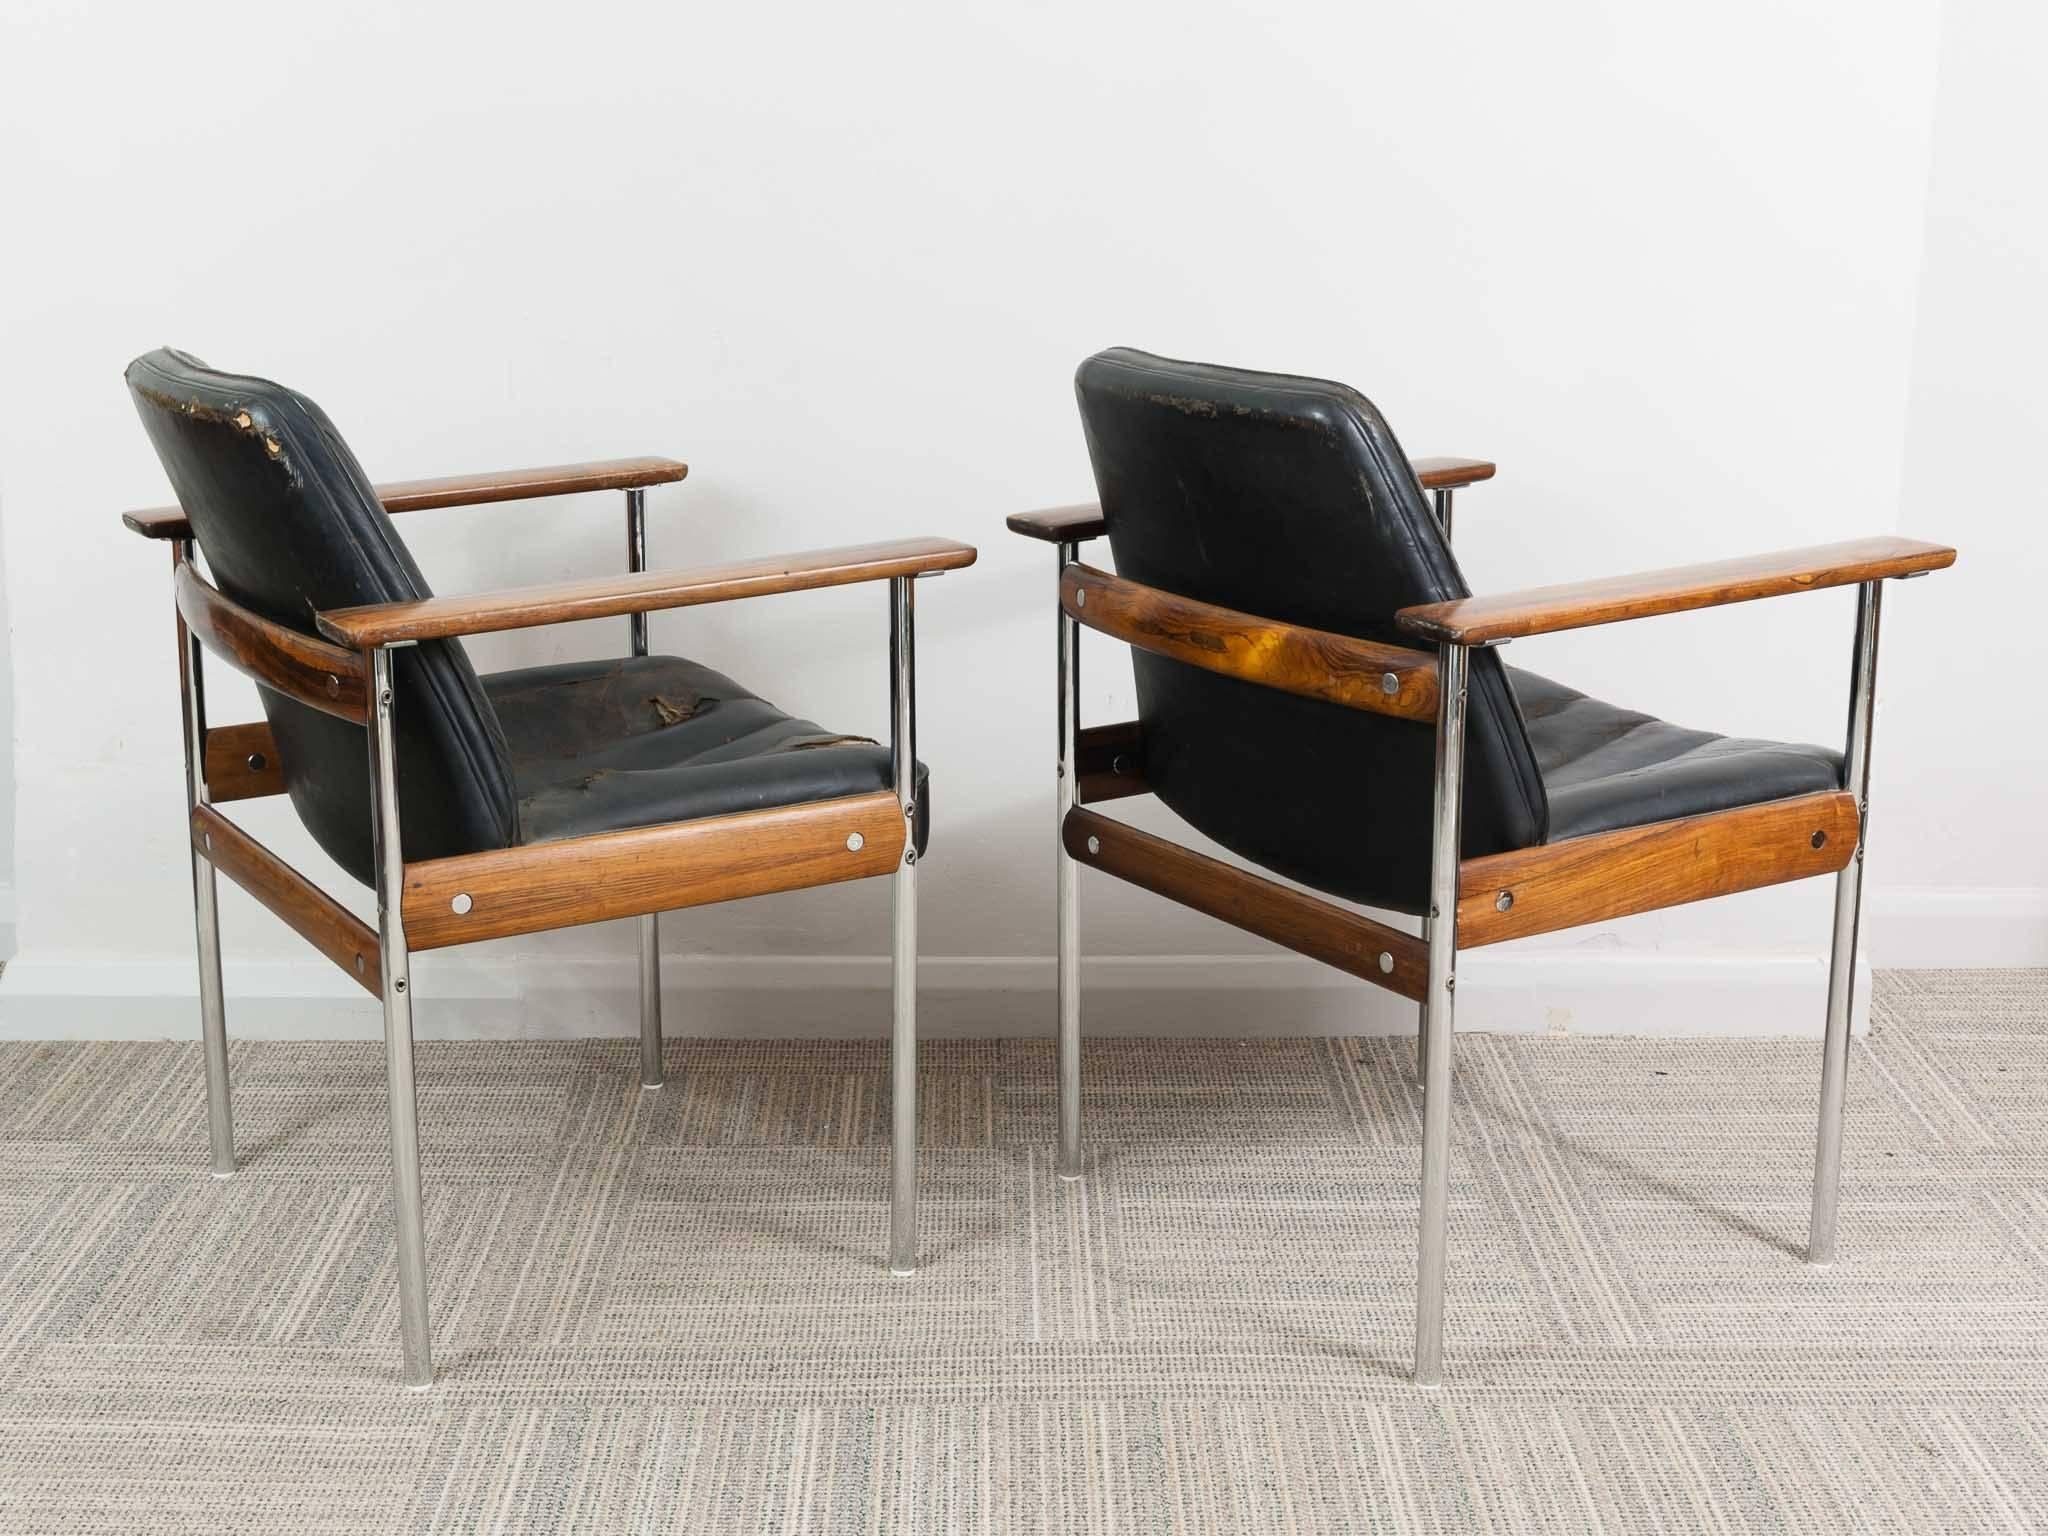 20th Century Pair of 1960s Rosewood Leather Chrome Armchairs by Sven Ivar Dysthe for Dokka